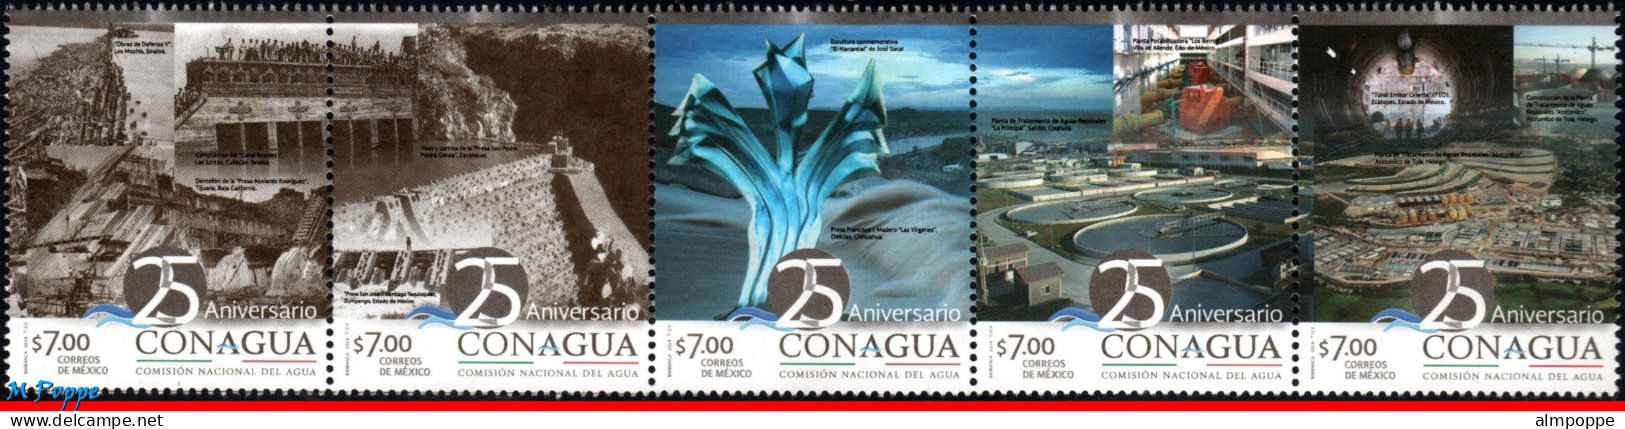 Ref. MX-2859 MEXICO 2014 - CONAGUA, 25TH ANNIV., NTLWATER COMMISSION, WATER DAMS, SET MNH, INDUSTRY 5V Sc# 2859 - Agua